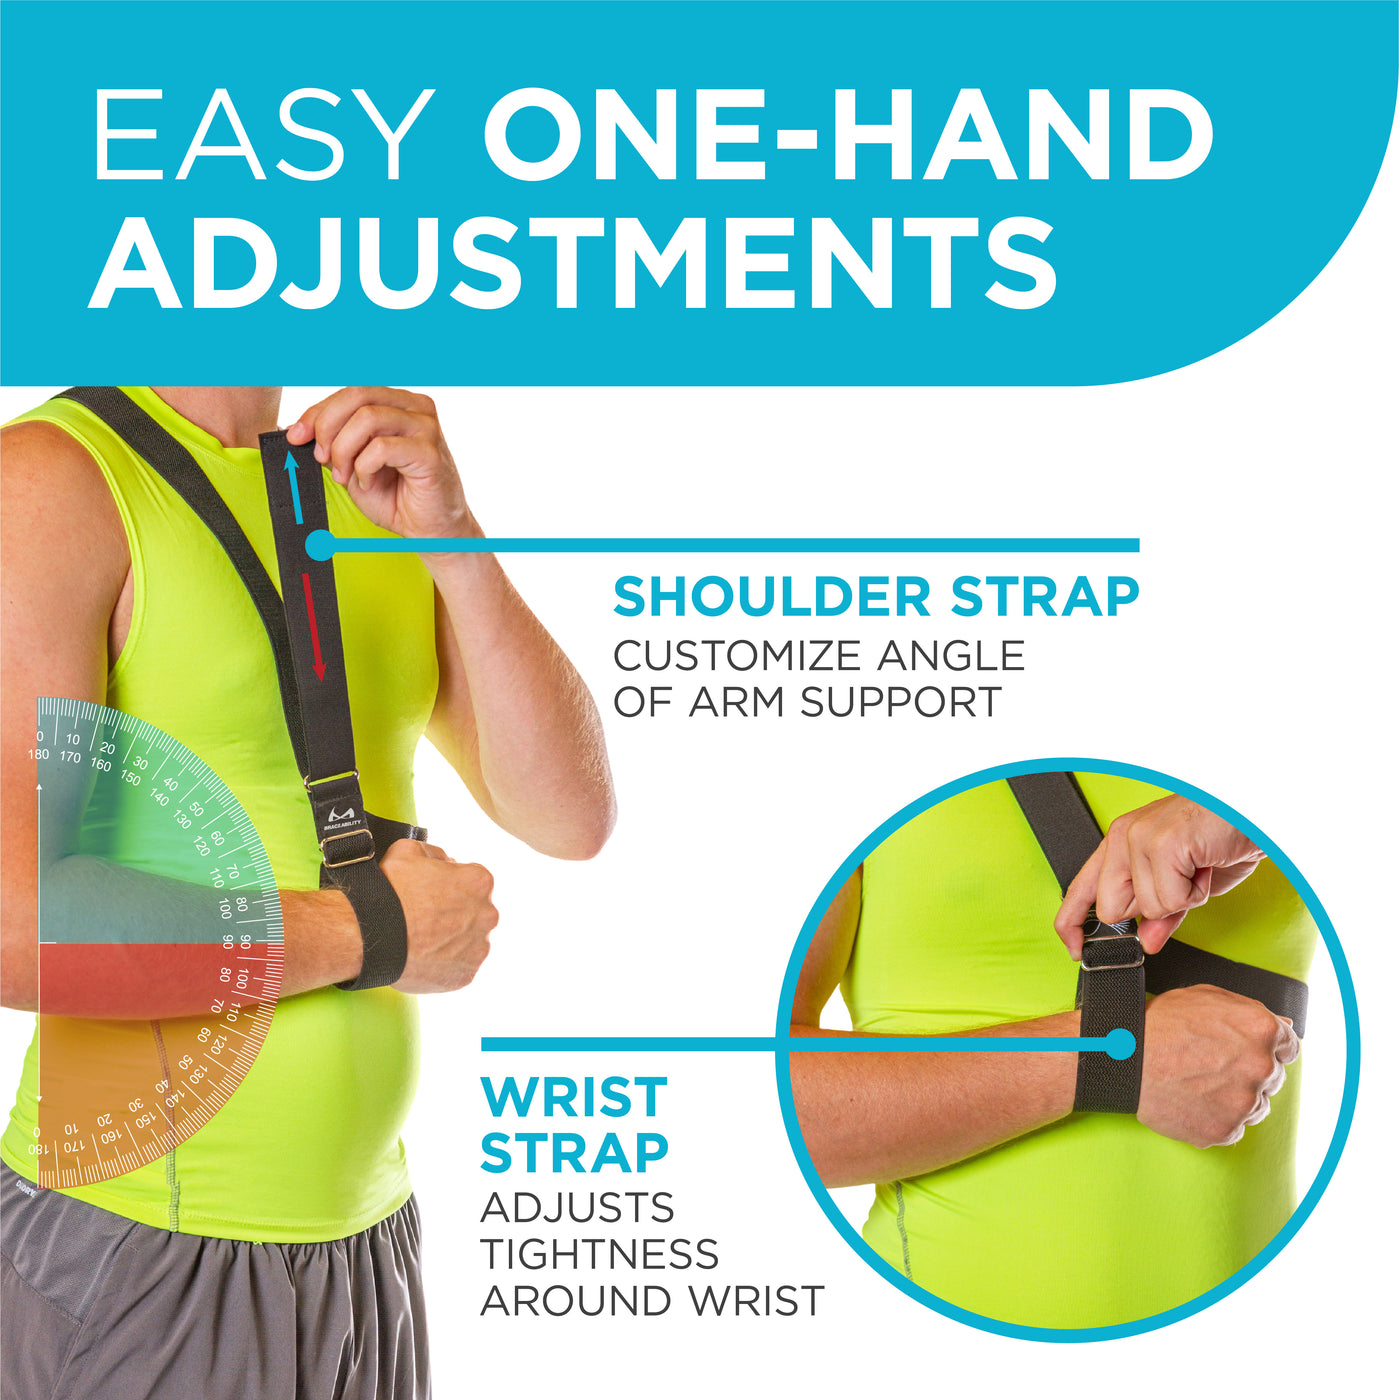 adjust the shoulder strap and wrist strap on the arm immobilizer with one hand